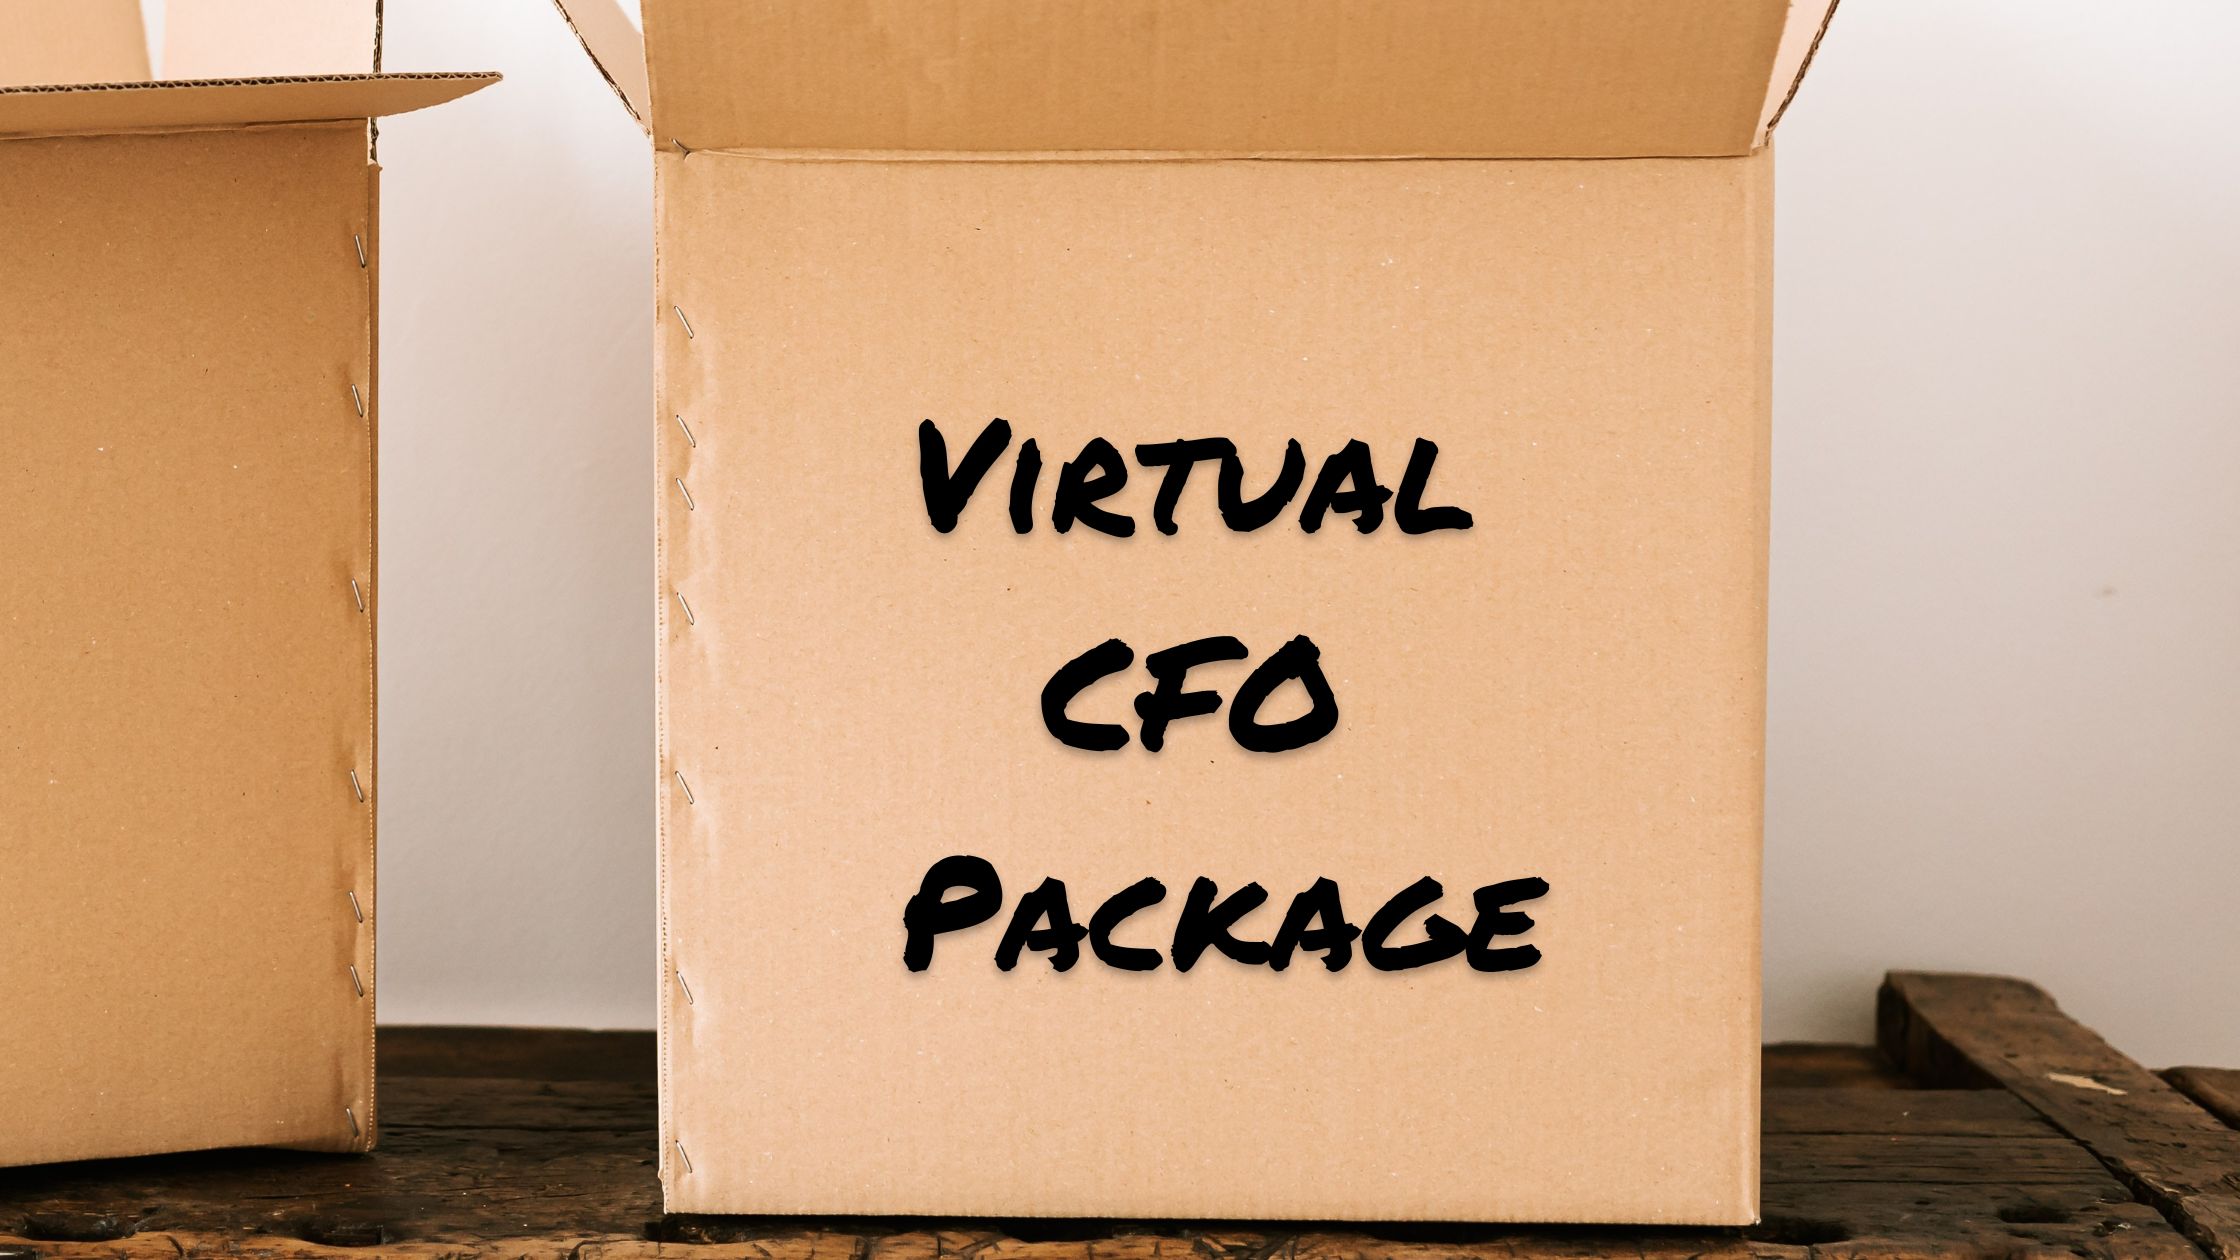 5 types of virtual CFO packages to consider for your business